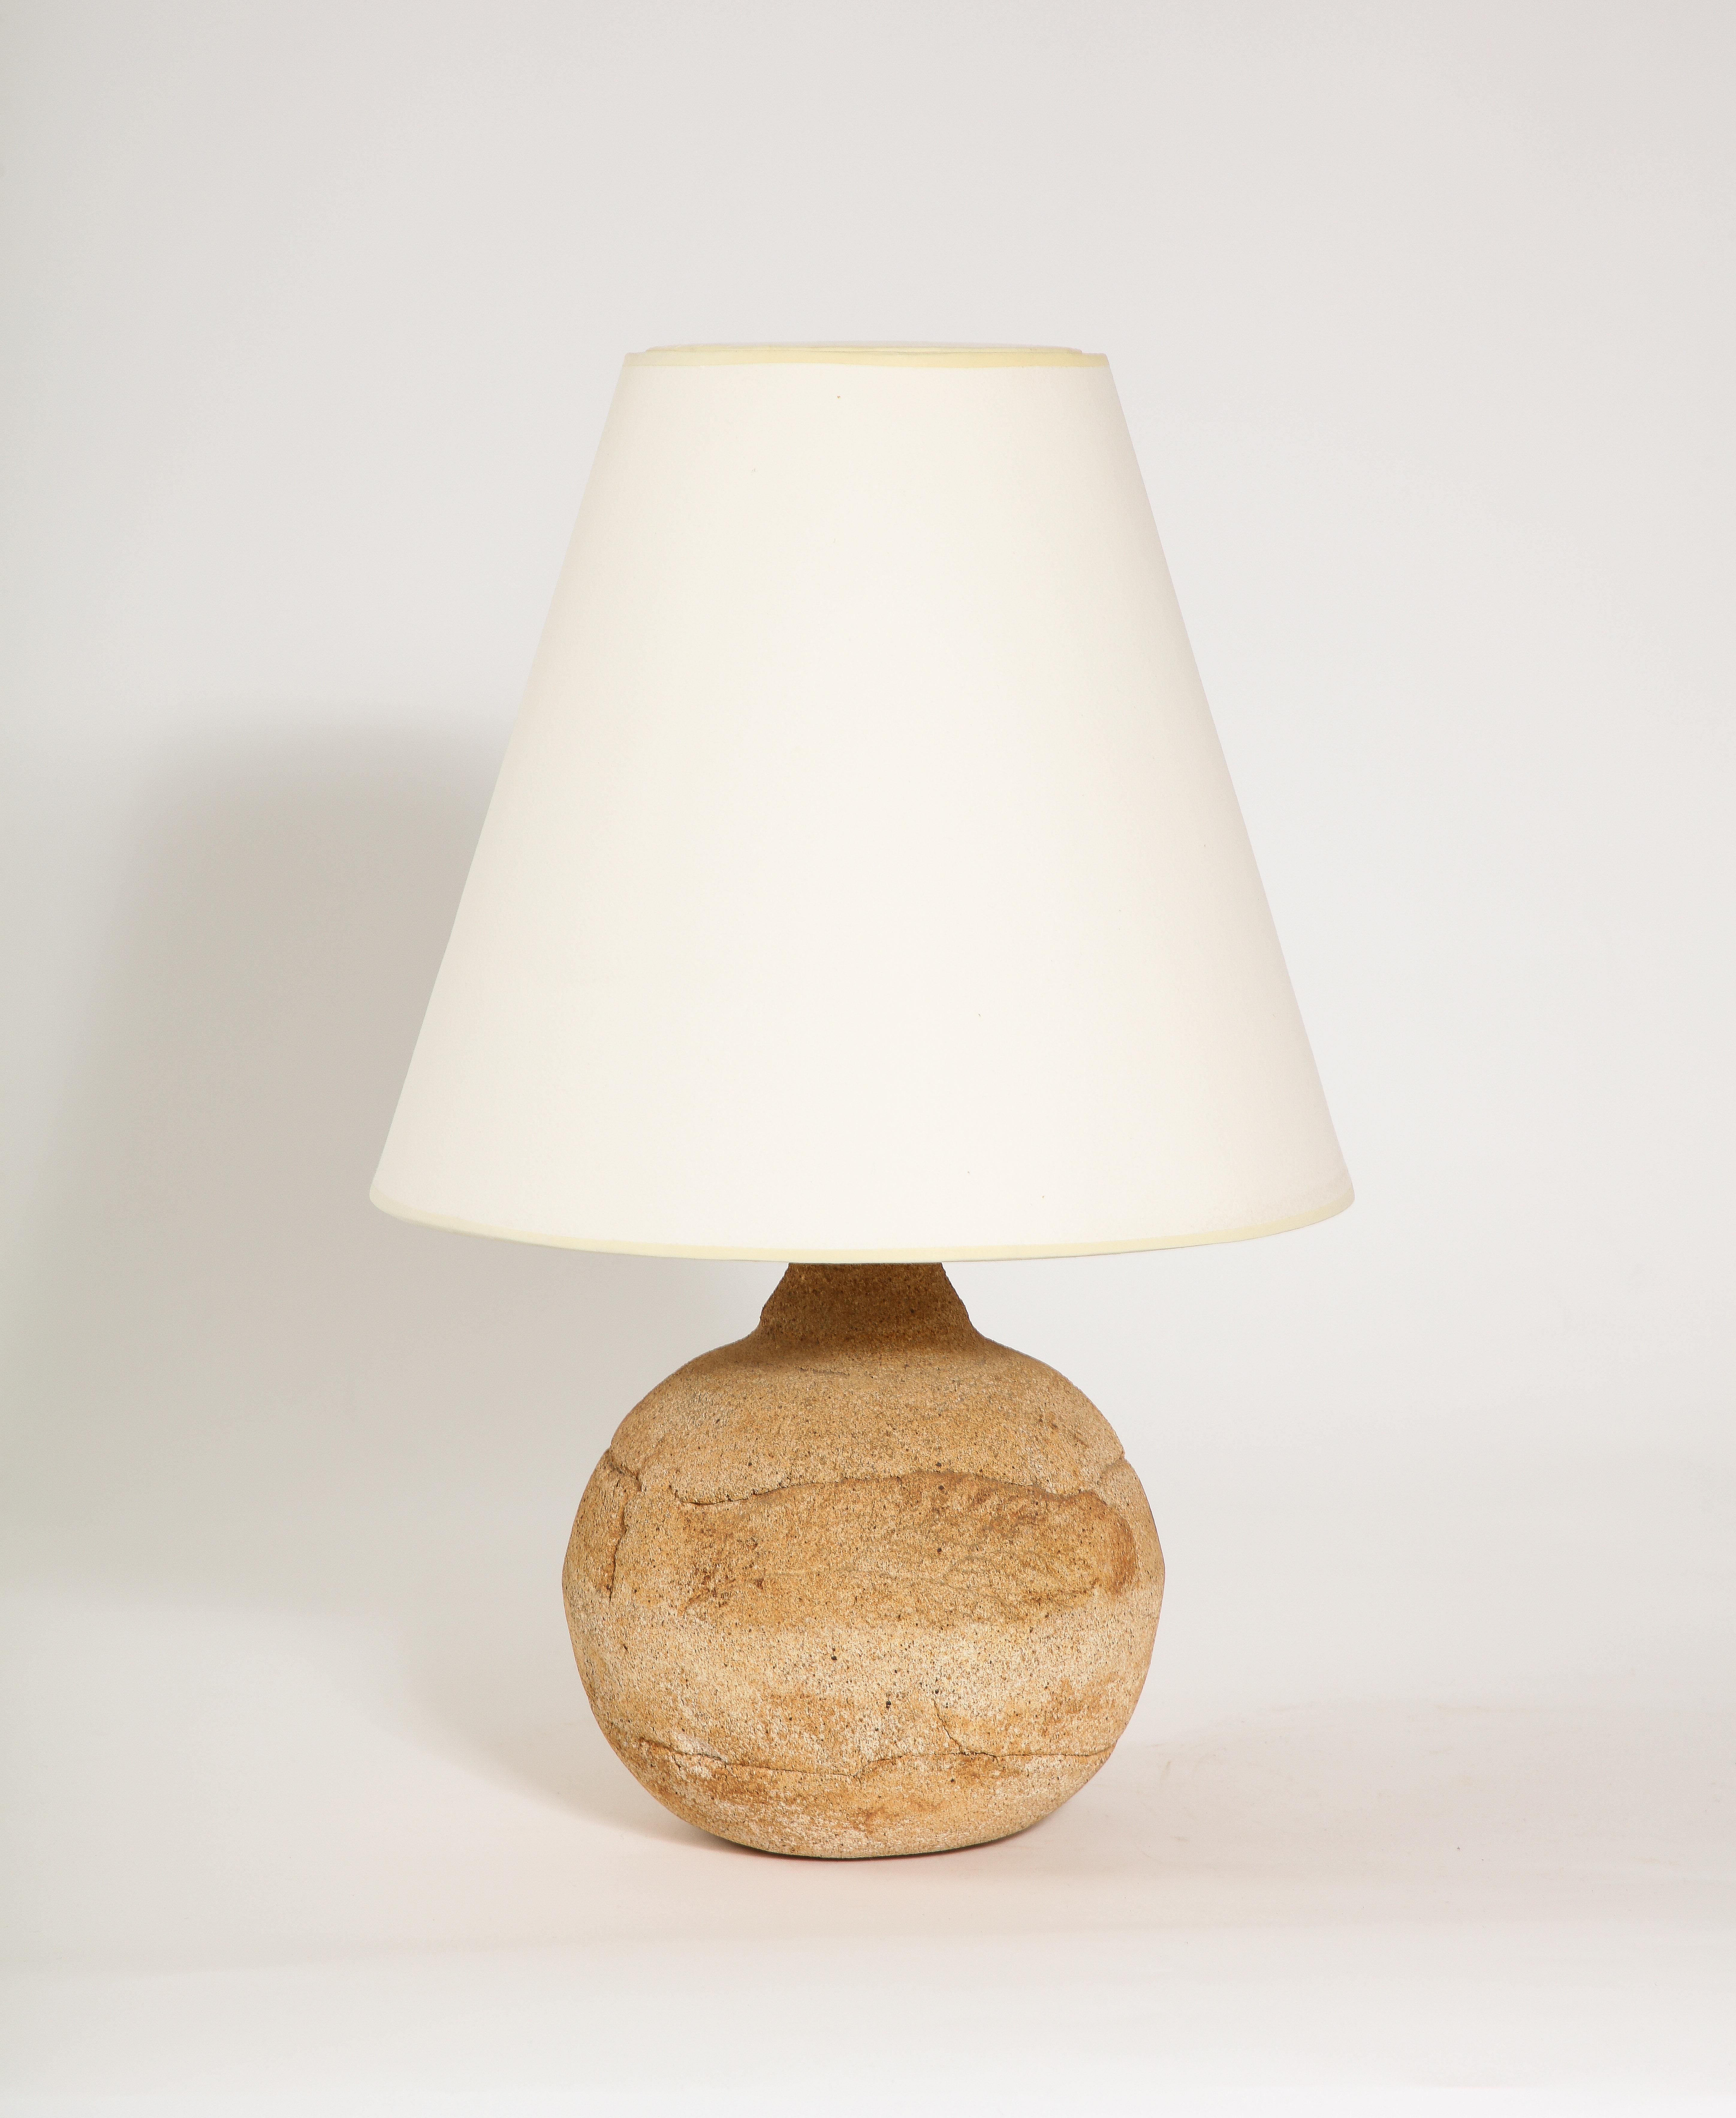 Layered Earthenware Table Lamp, France 1960's For Sale 1